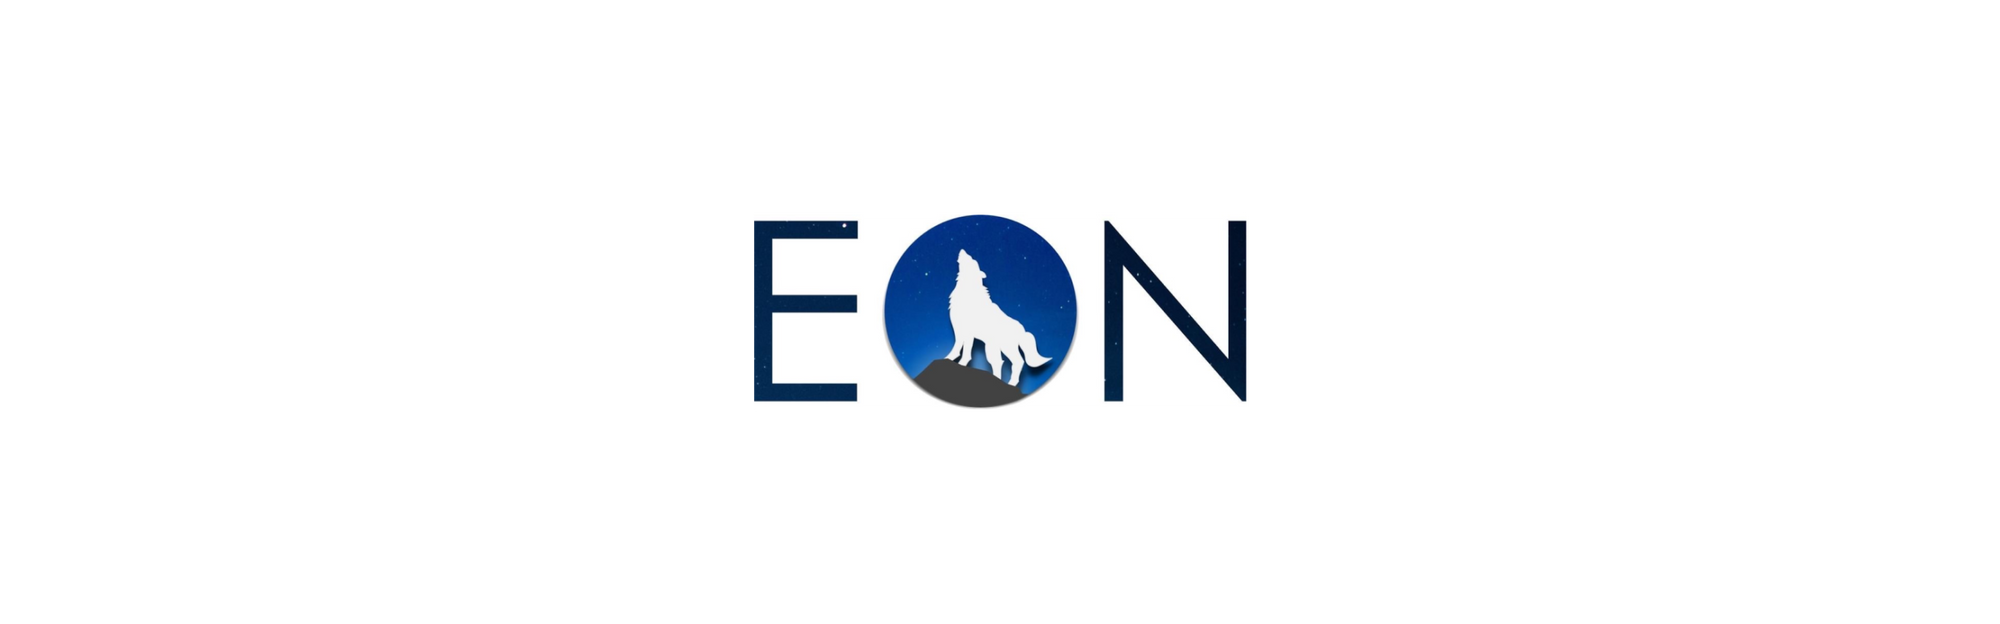 Modernizing the Horror Industry - Eon Wolf Productions